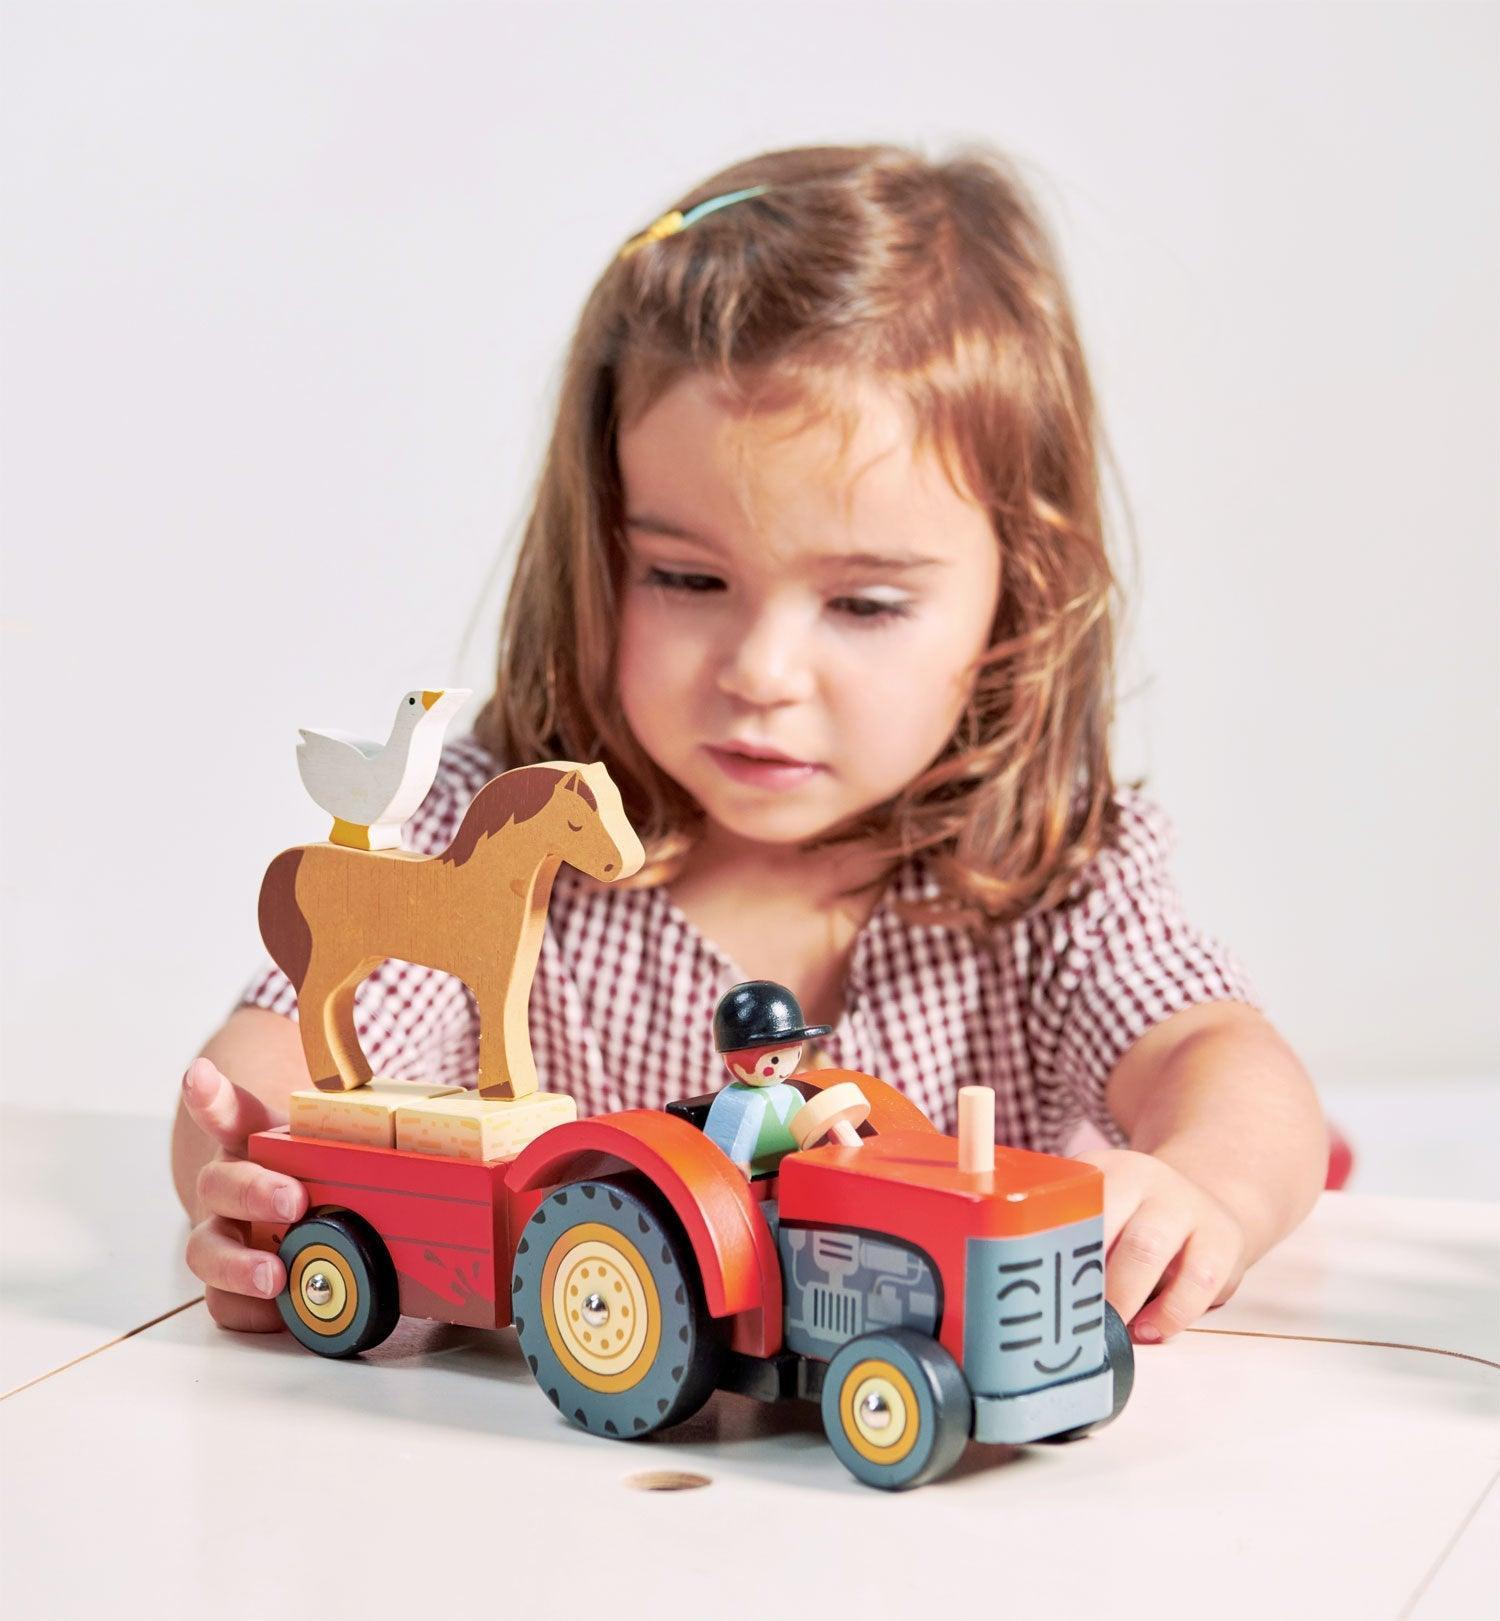 Tender Leaf Farmyard Tractor - Why and Whale